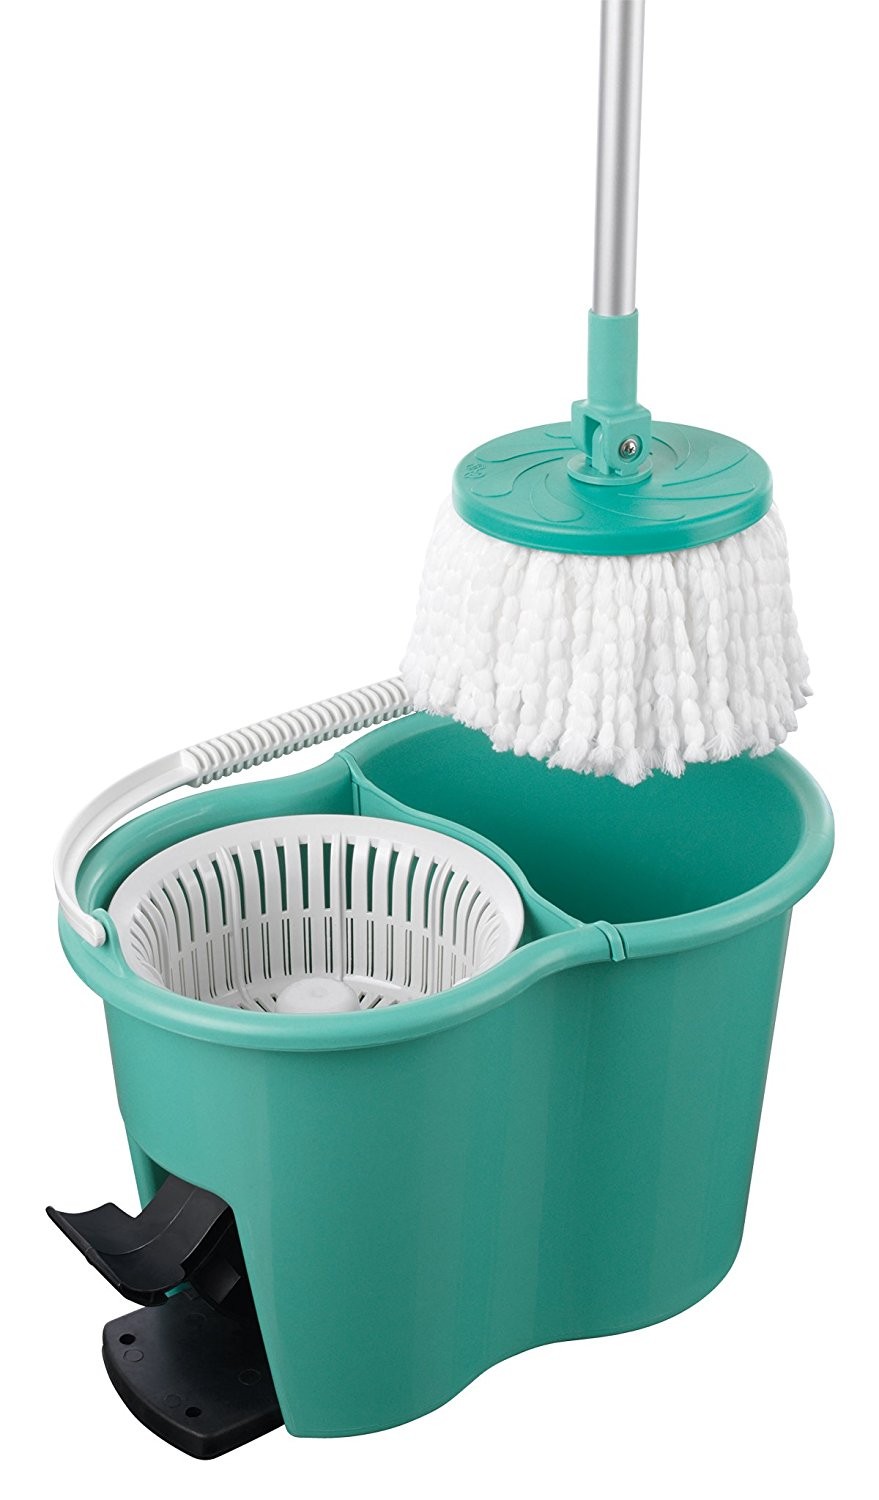 Bucket and mop